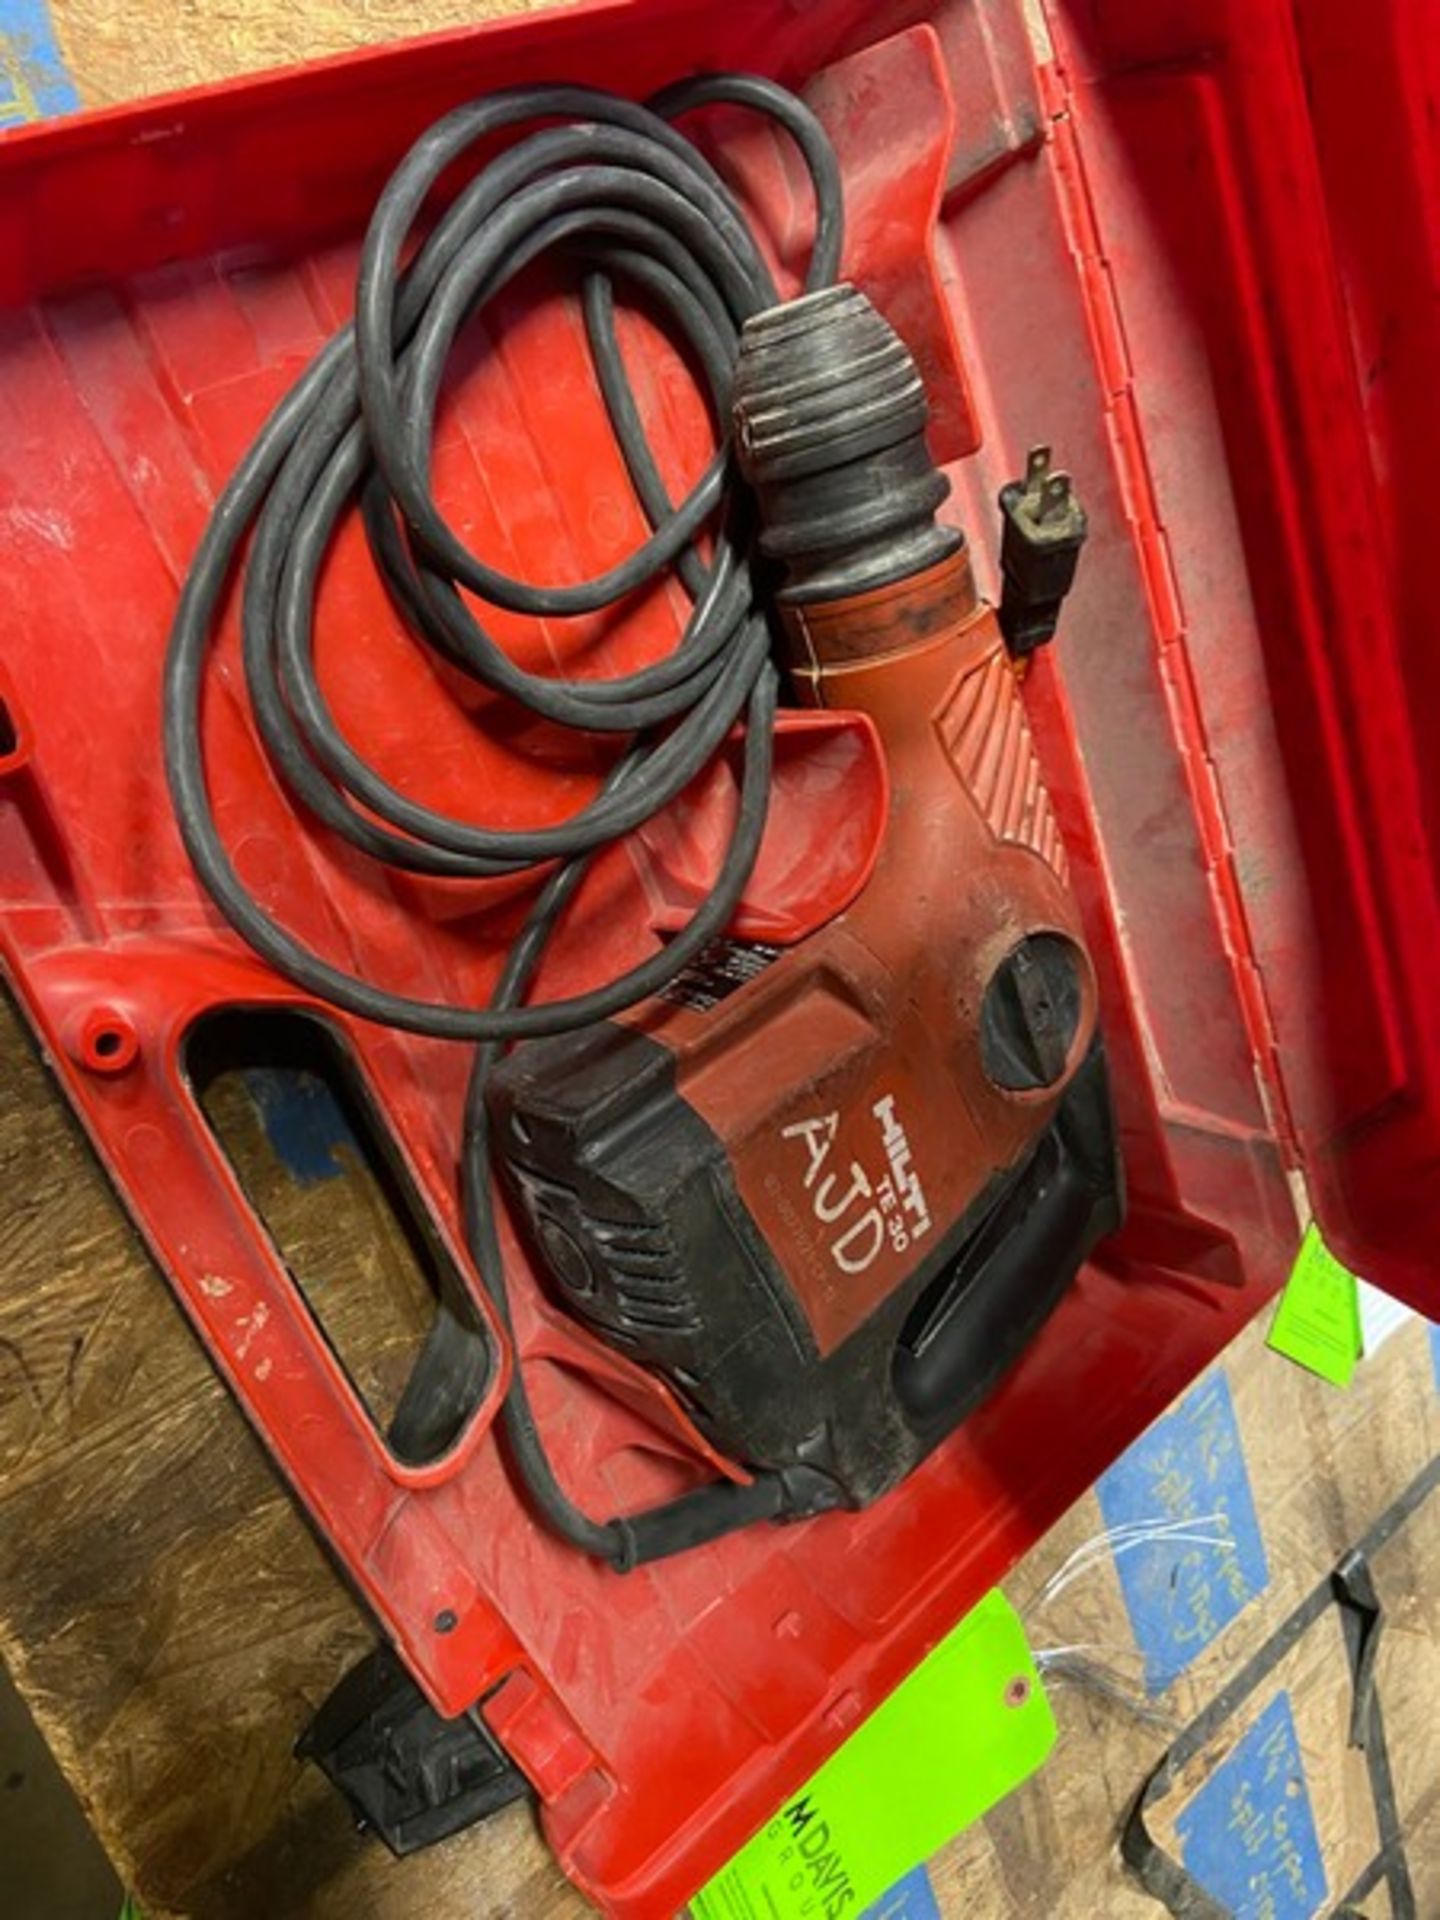 HILTI Rotary Hammer Drill, M/N TE 30, with Power Cord & Hard Case (LOCATED IN MONROEVILLE, PA)